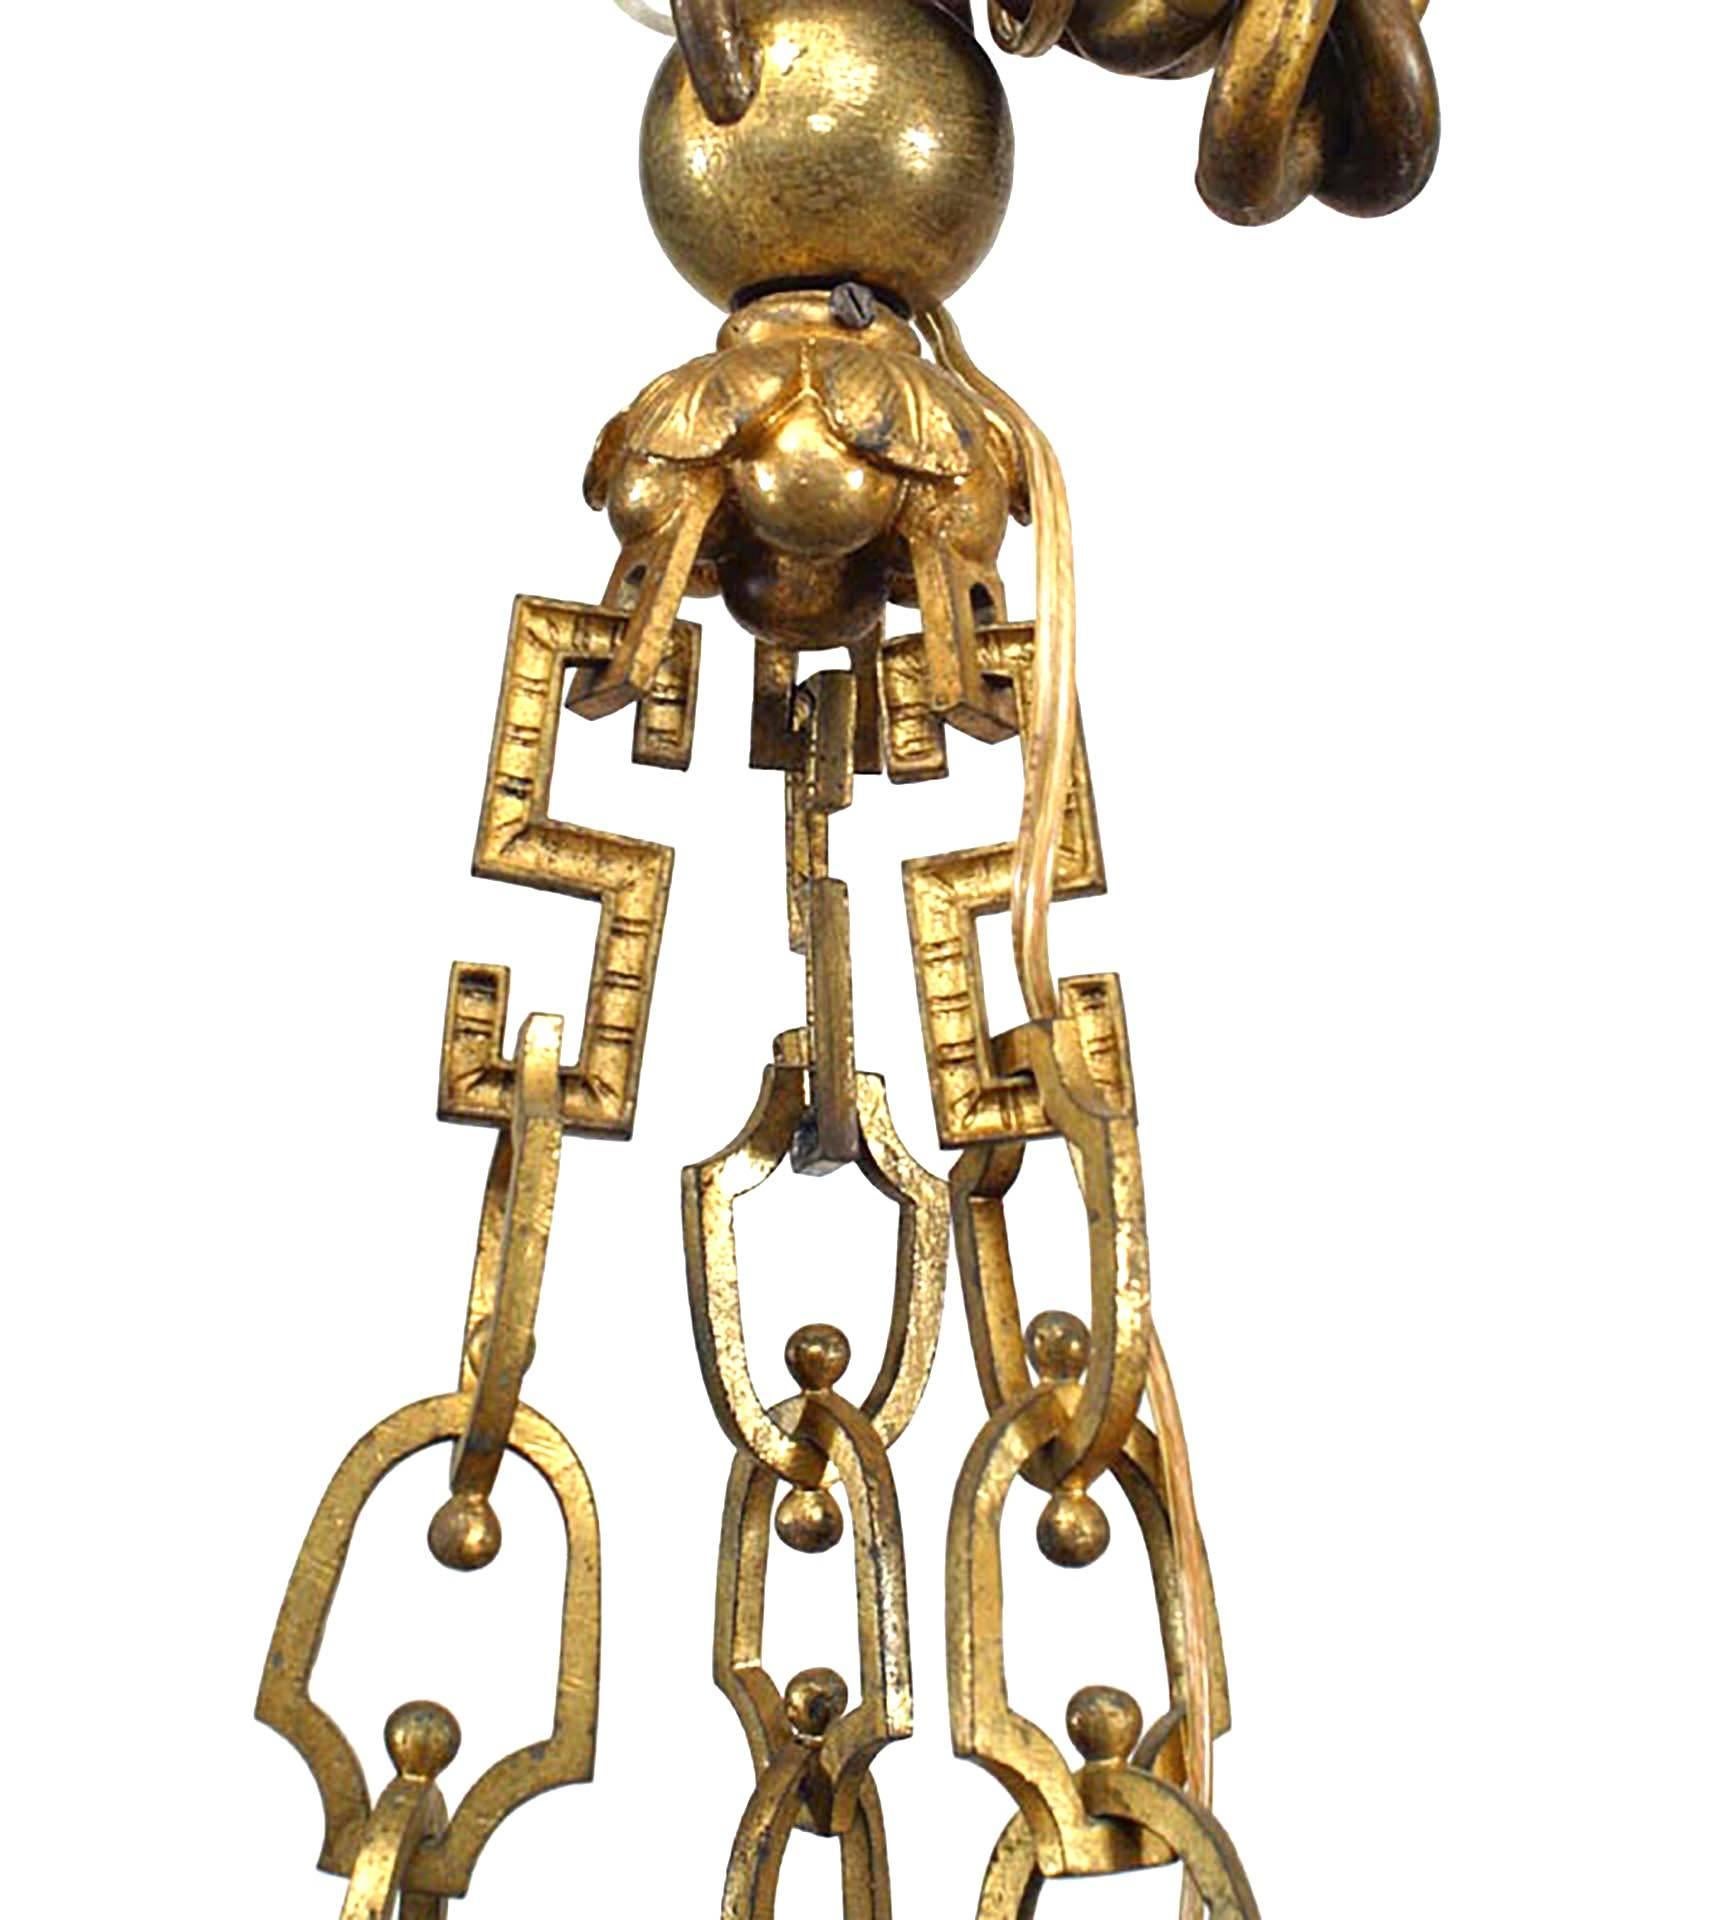 French Louis XVI-Style (19th Century) bronze dore 9 scroll arm chandelier with 3 cupids playing instruments and flame top
